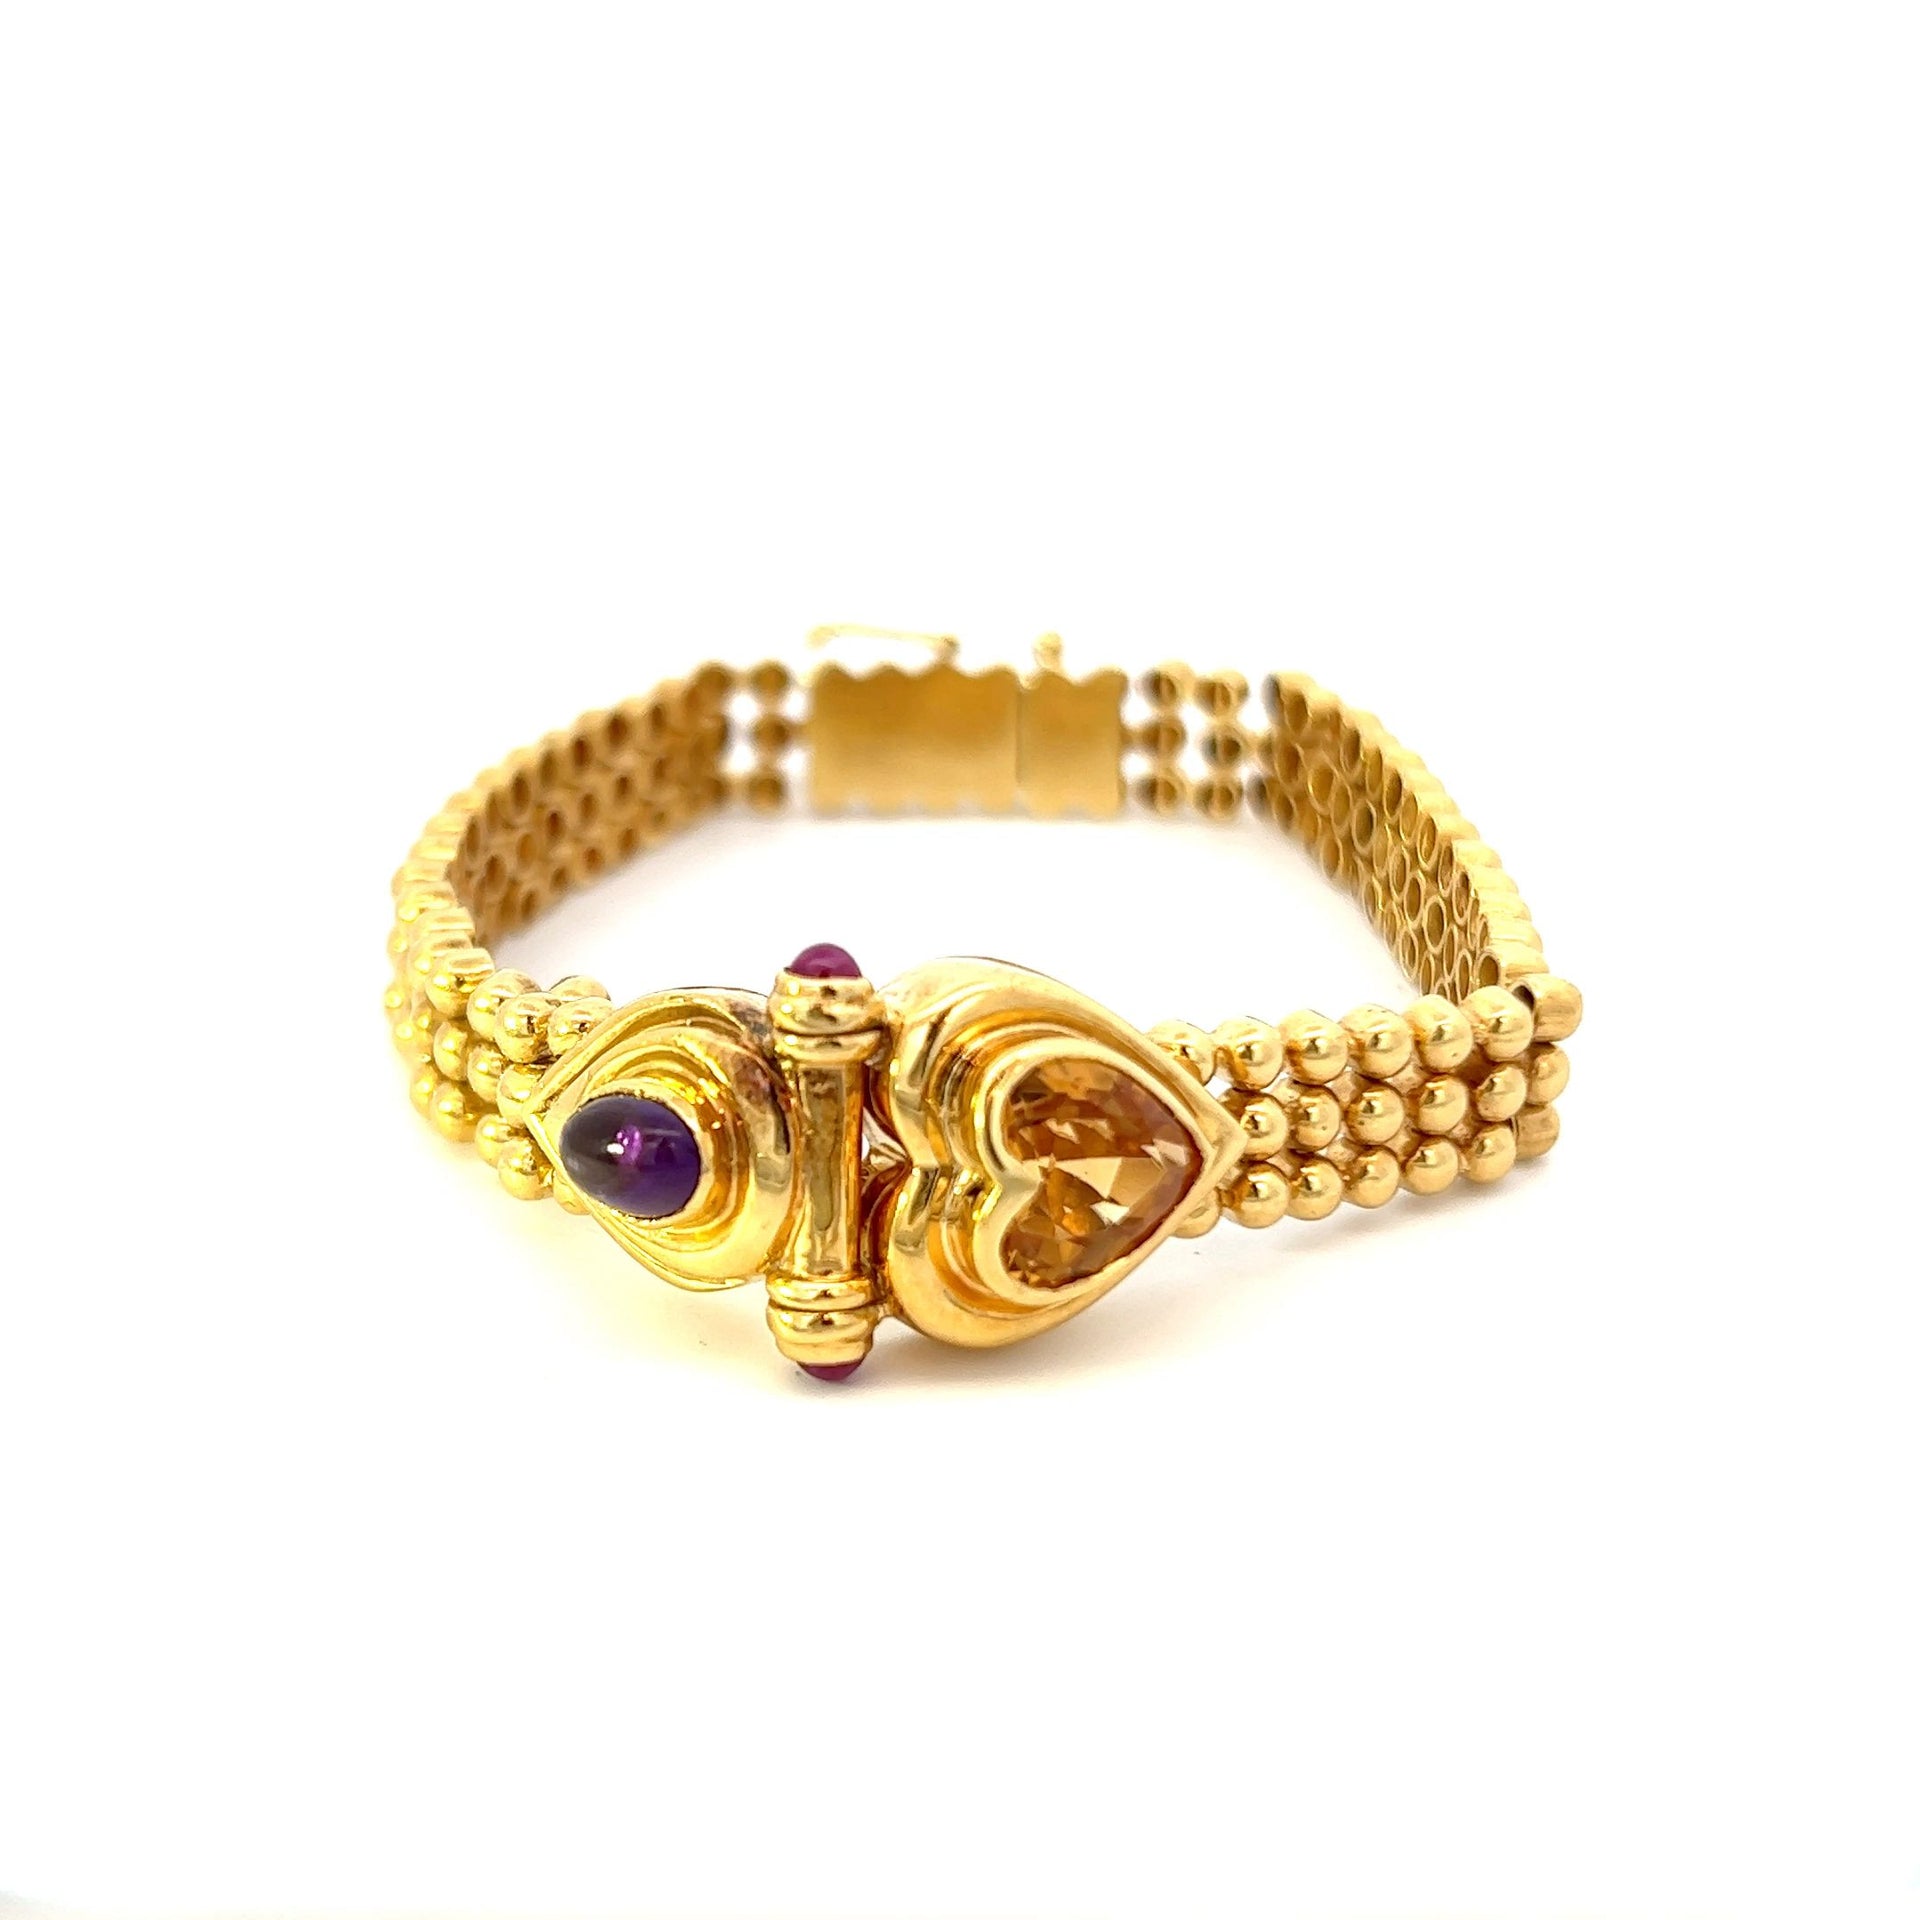 Vintage 18KT Yellow Gold Ruby, Citrine And Amethyst Beaded Bracelet